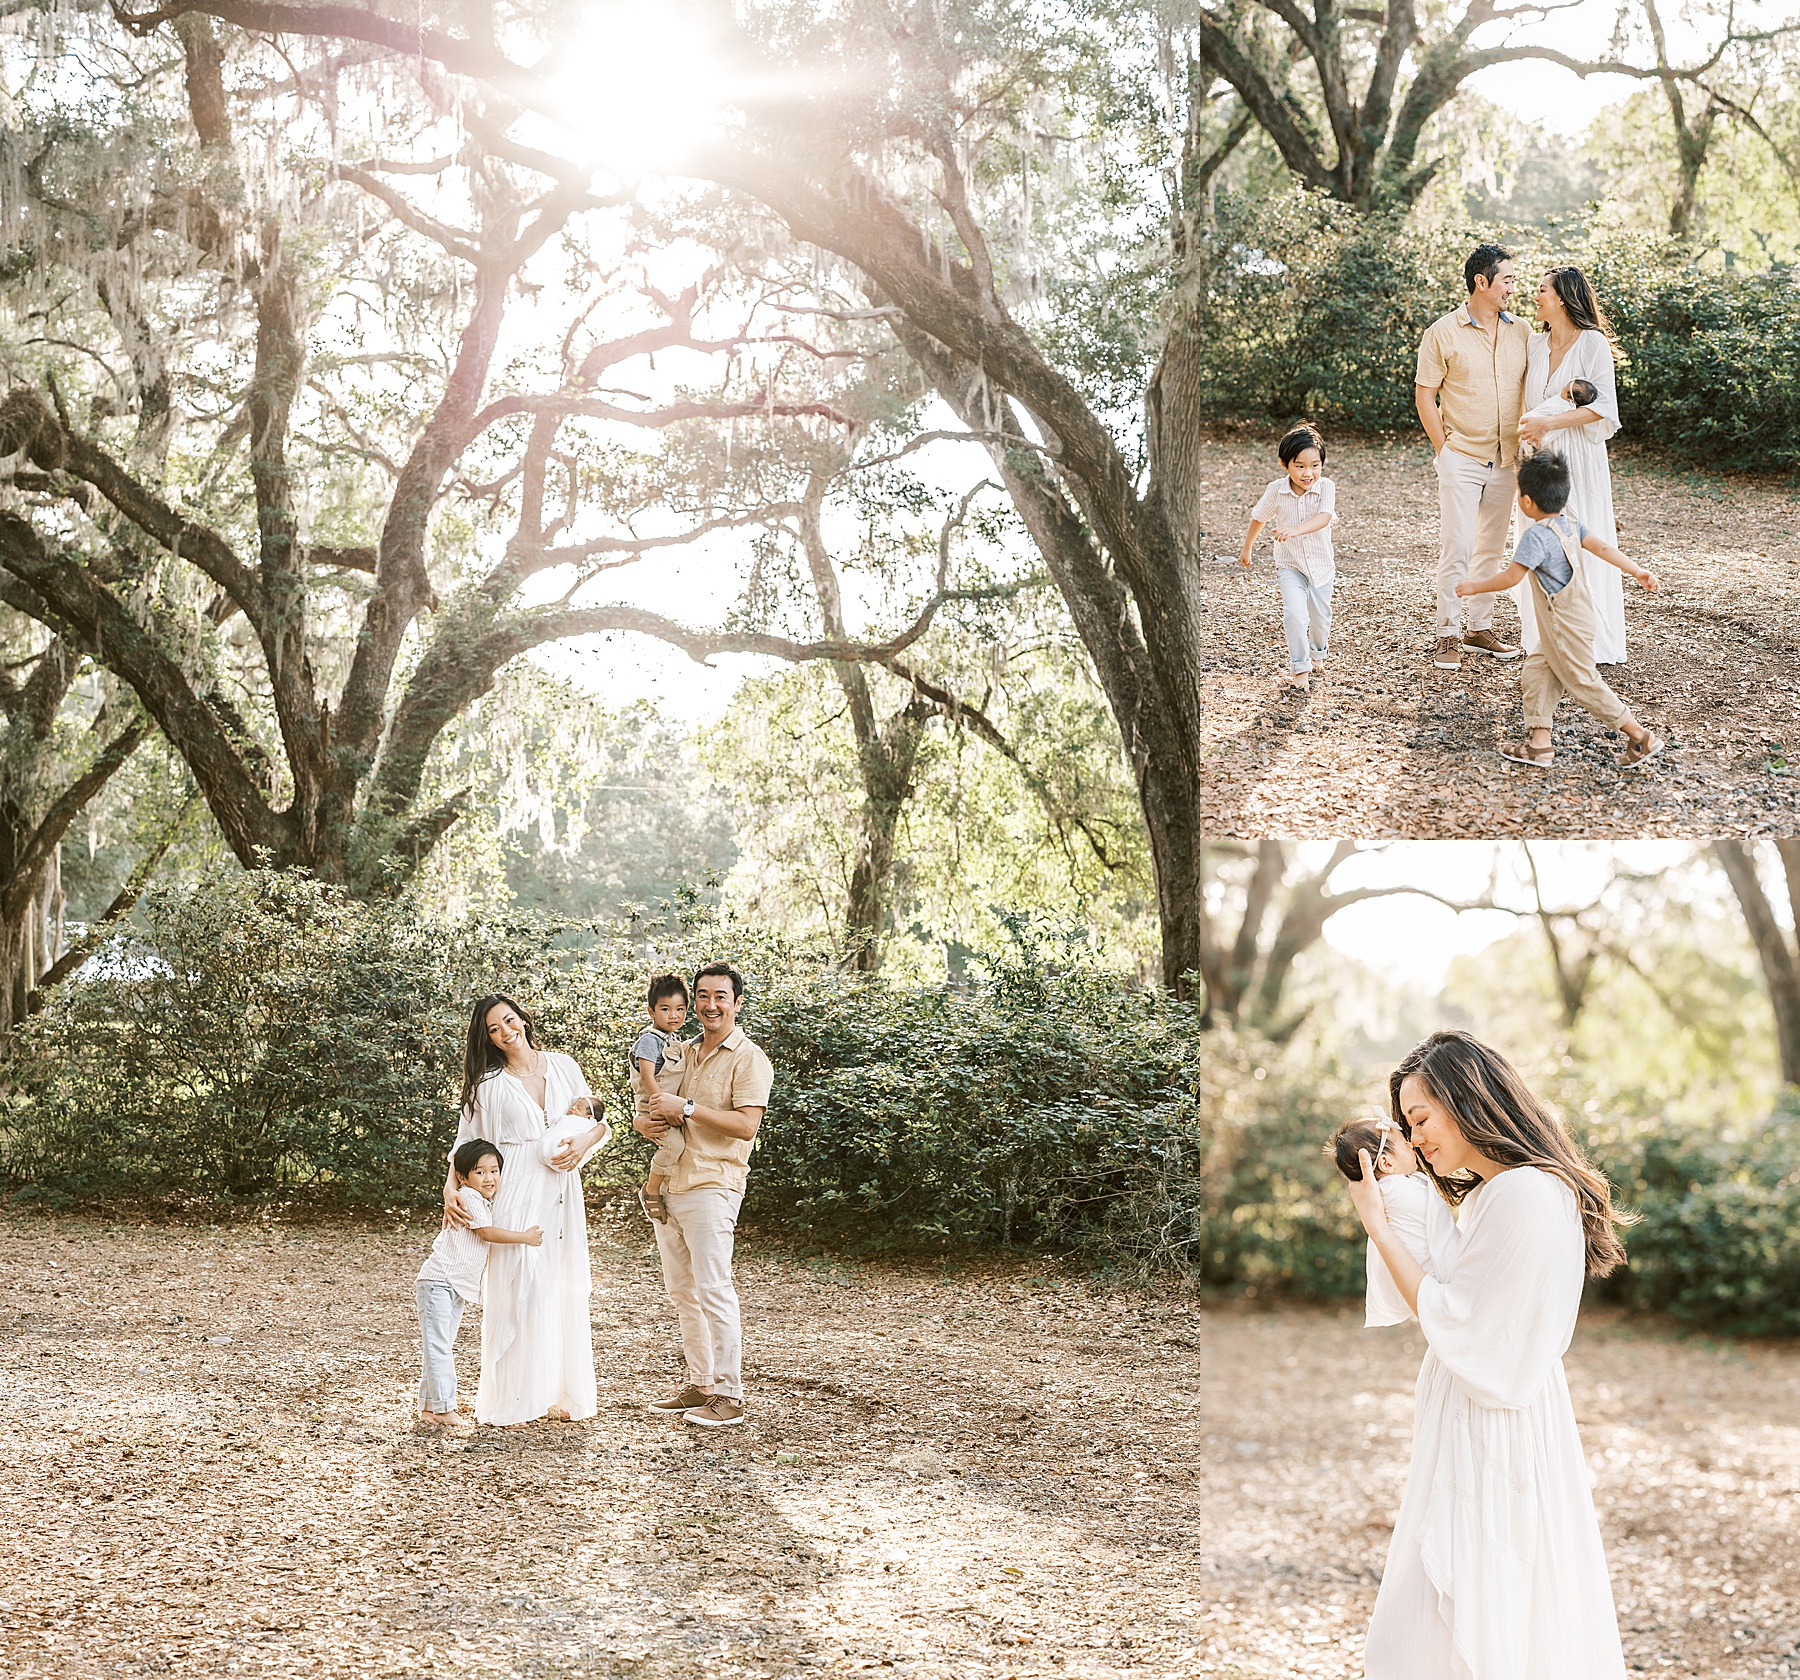 light and airy neutral images of family with newborn baby girl in sun haze field in Gainesville, Florida